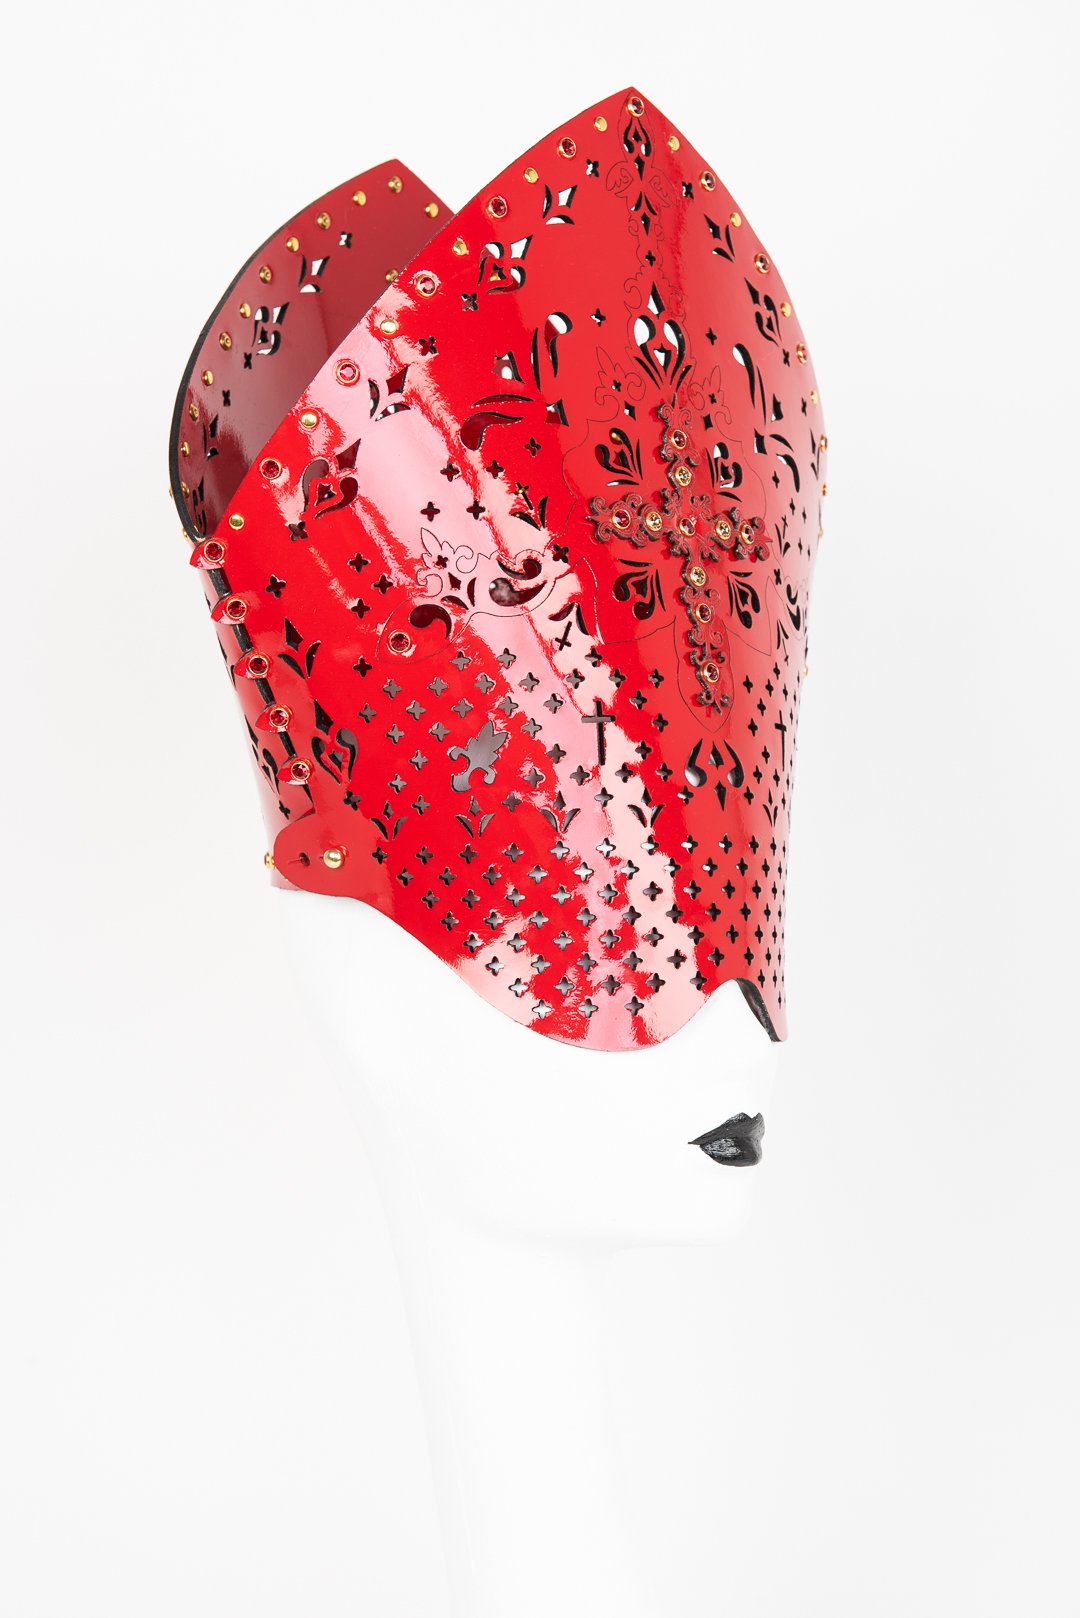 Patent Leather Mitre Hat with Crystal Rivets Buy Online at Fraulein Kink